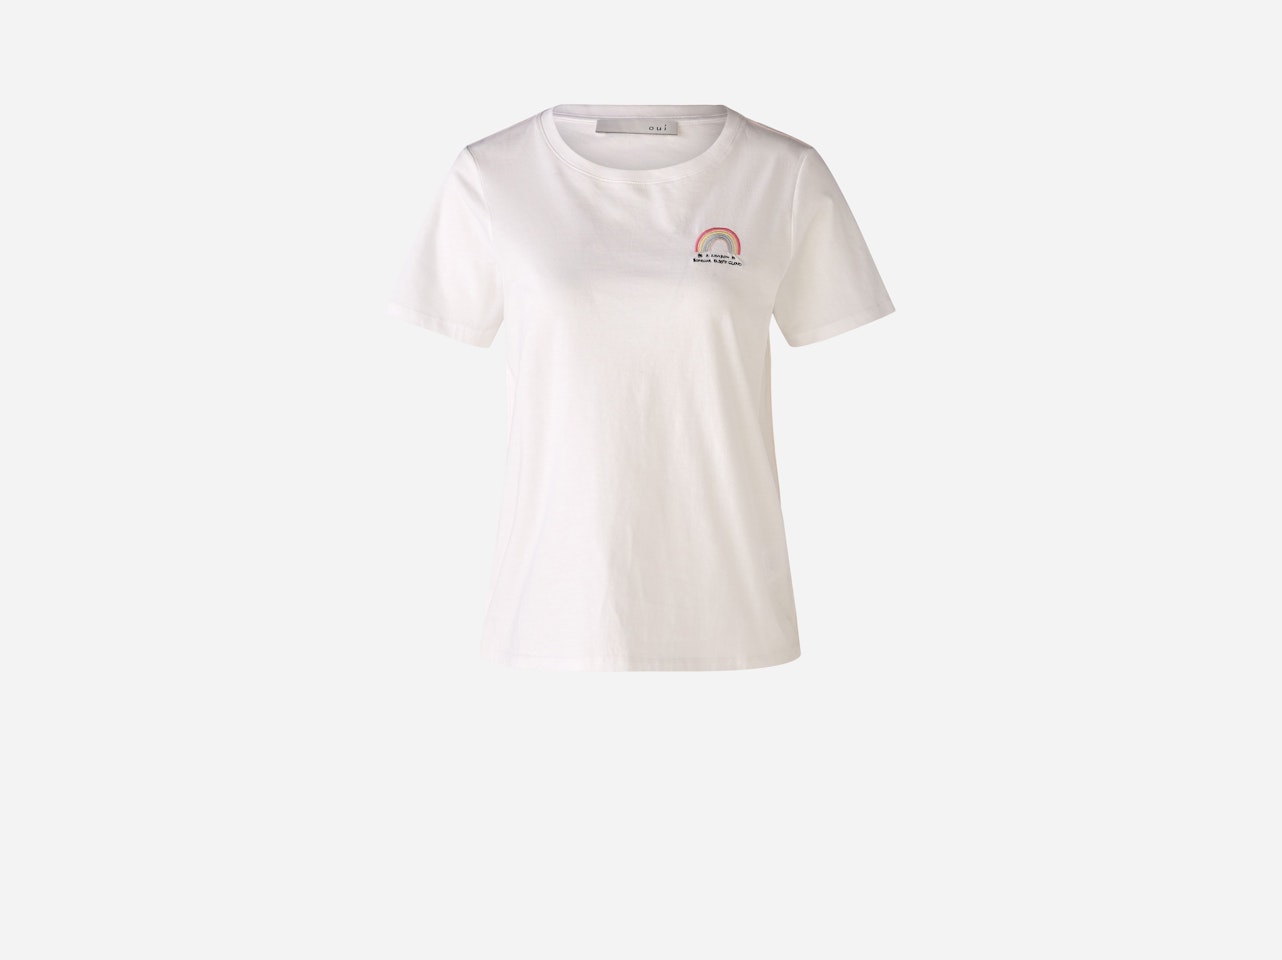 T-shirt with small rainbow embroidery